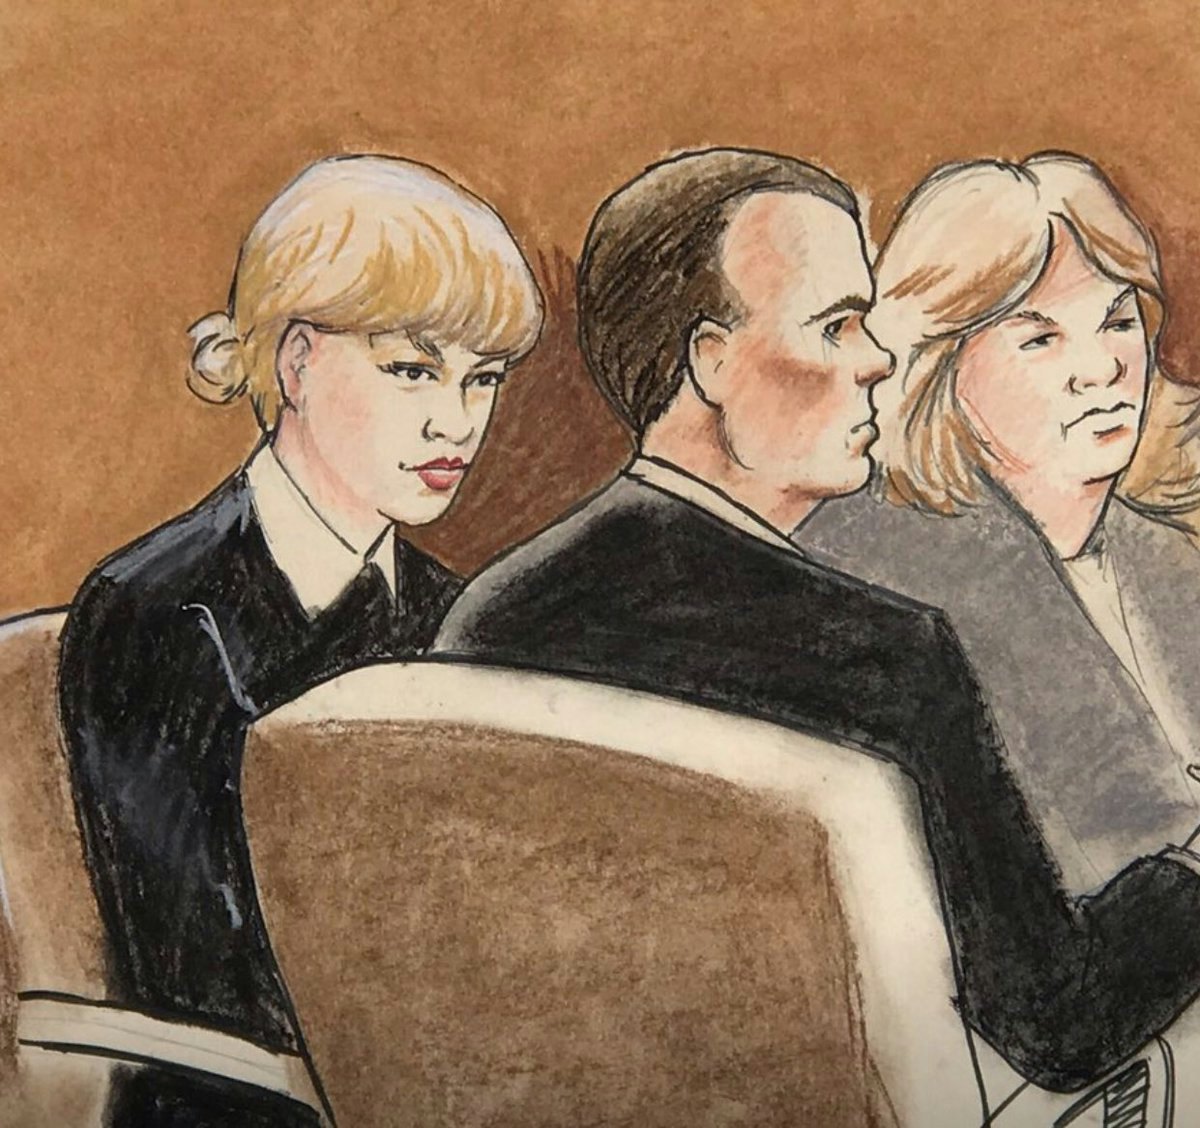 The Illustrated Courtroom' Finds Art In Real-Life Legal Drama : NPR